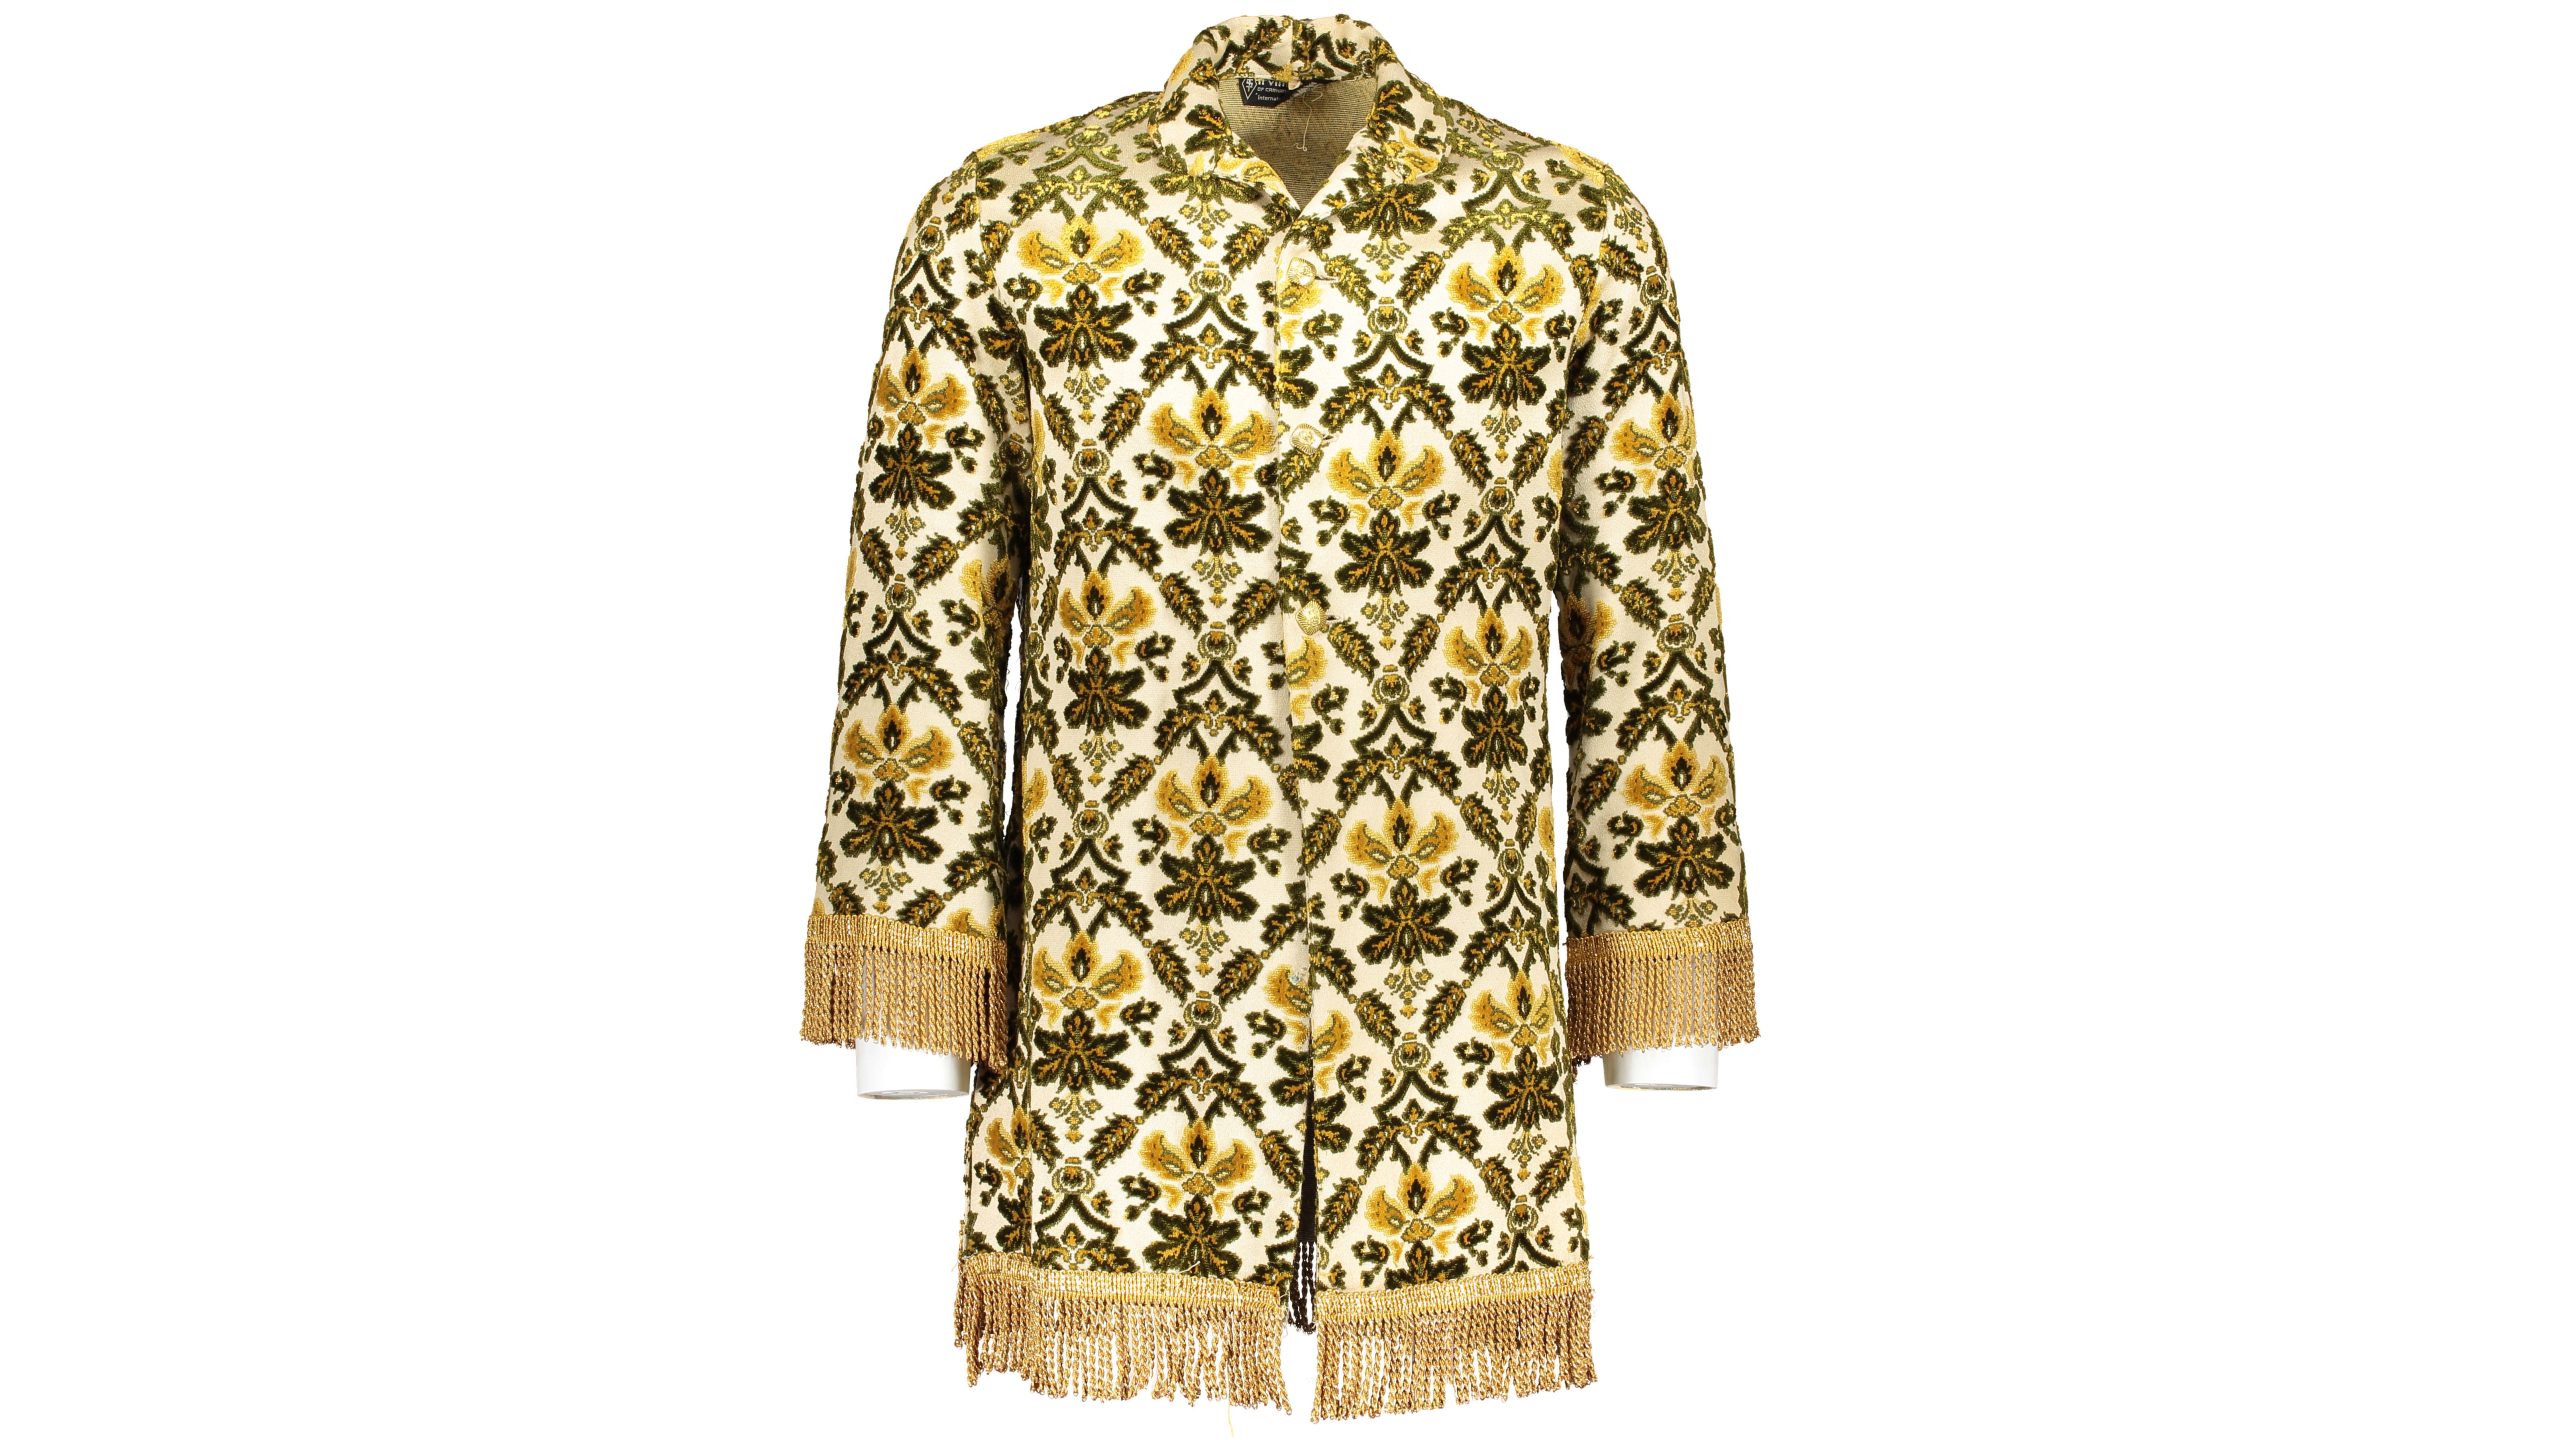 photograph of brocade jacket by the designer Irvine Sellar - cream with gold detailing